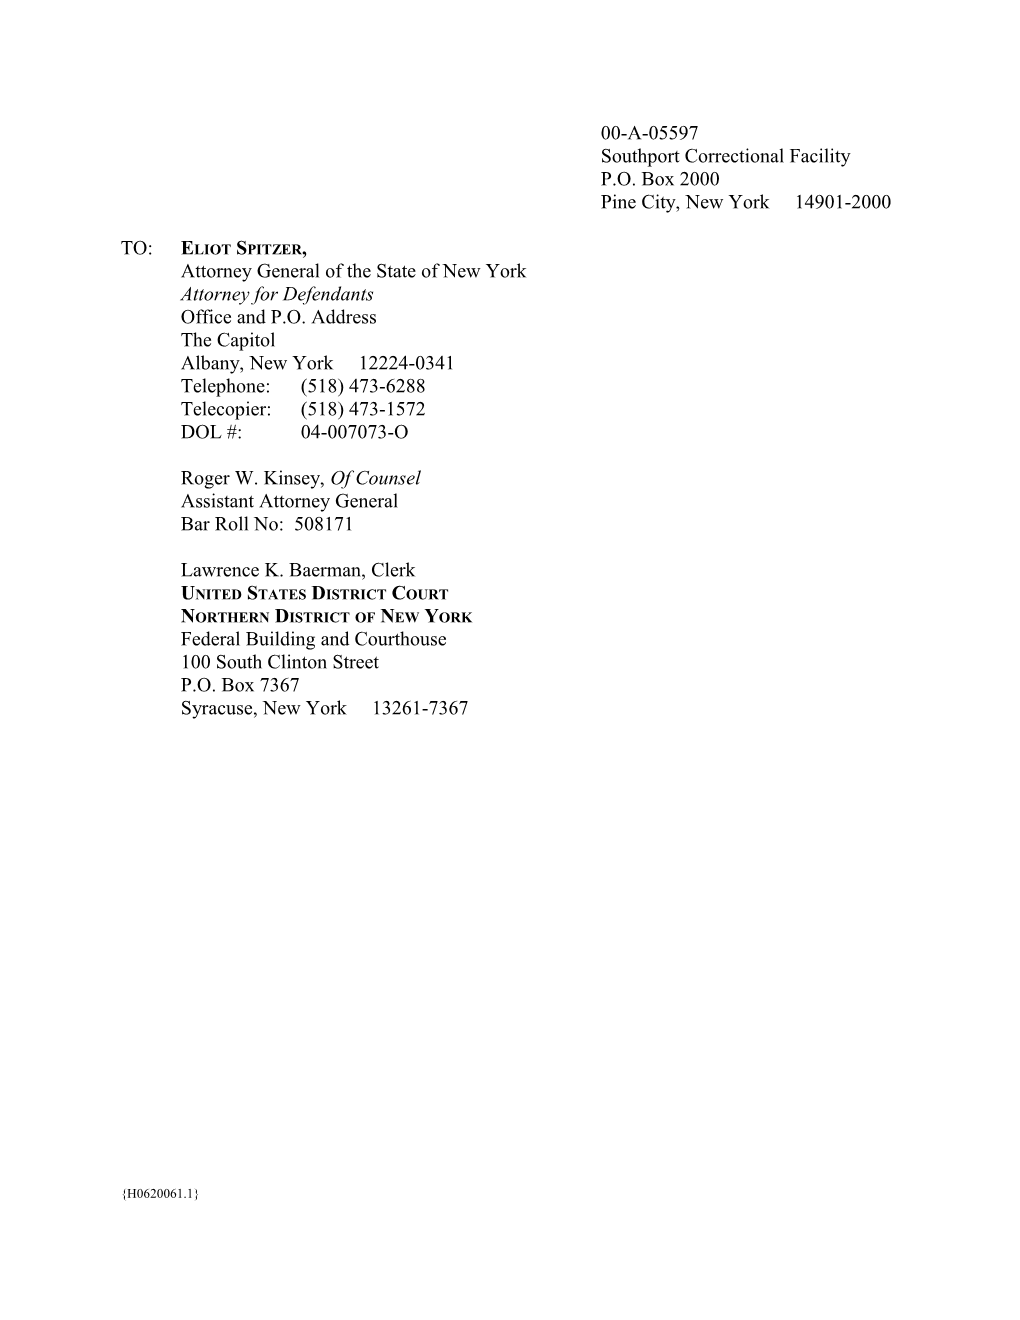 Trial - Proposed Witness List (H0620061.DOC;1)